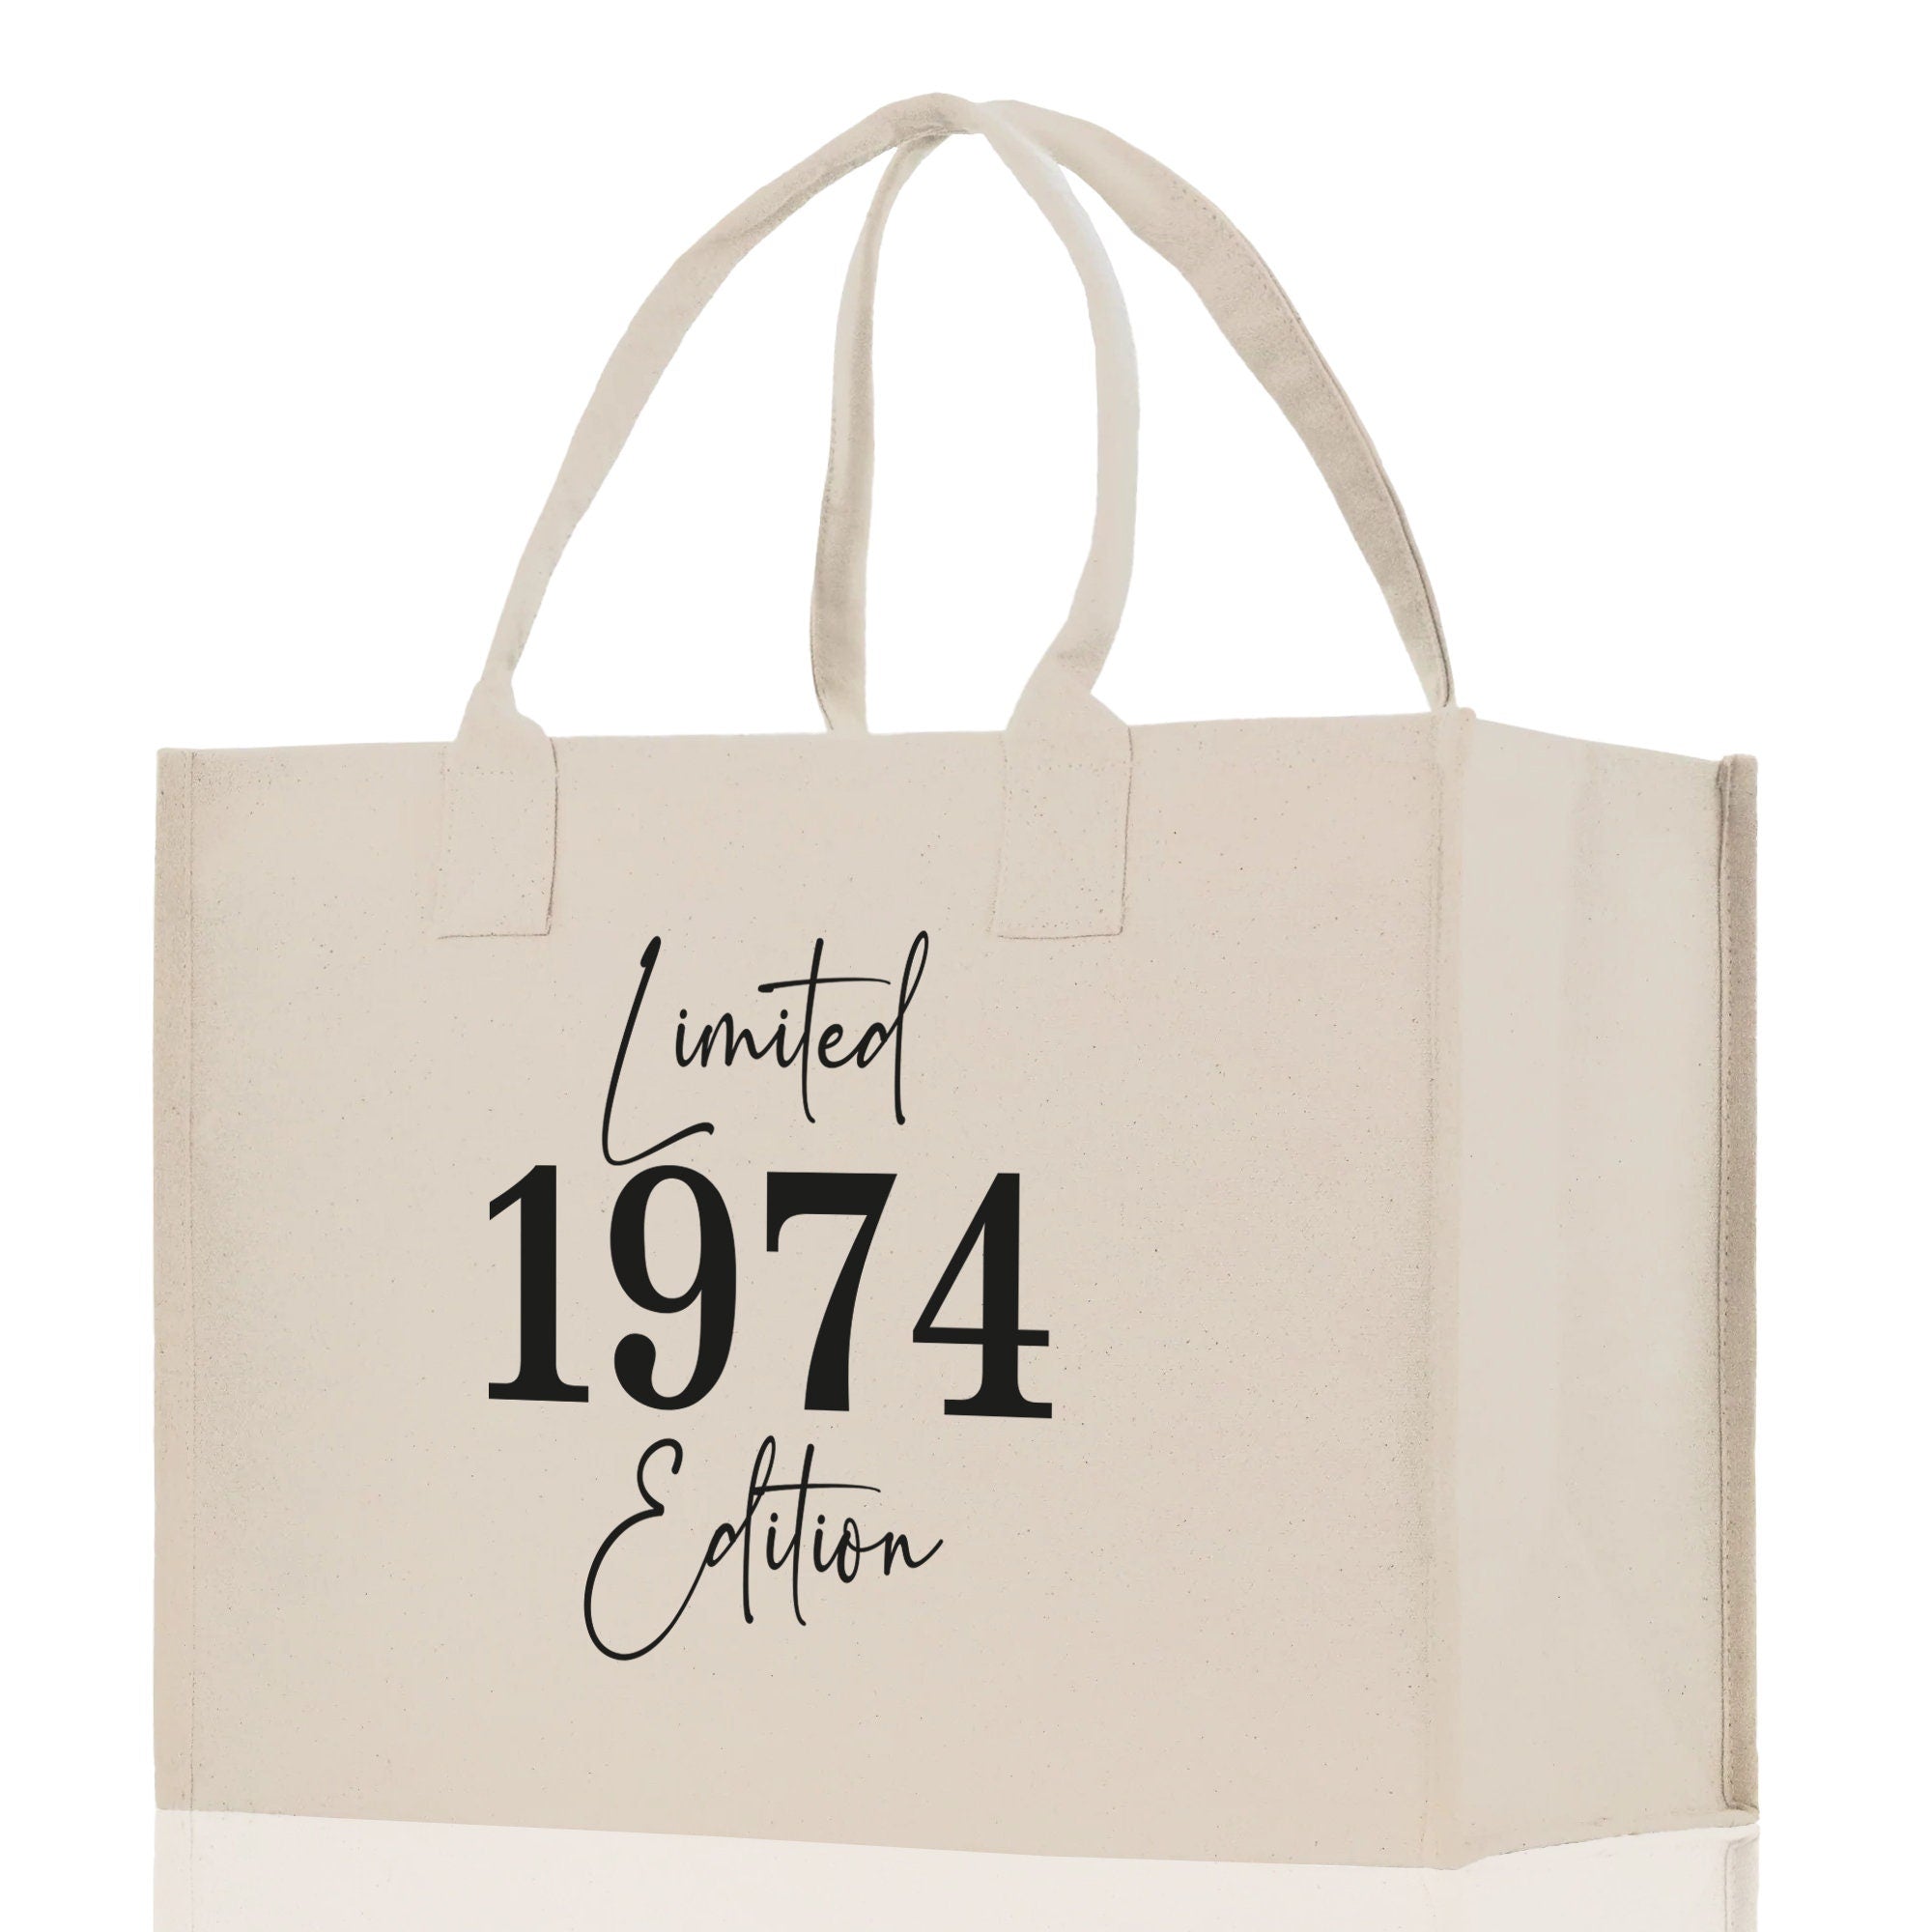 a white shopping bag with the words limited 1974 and future printed on it